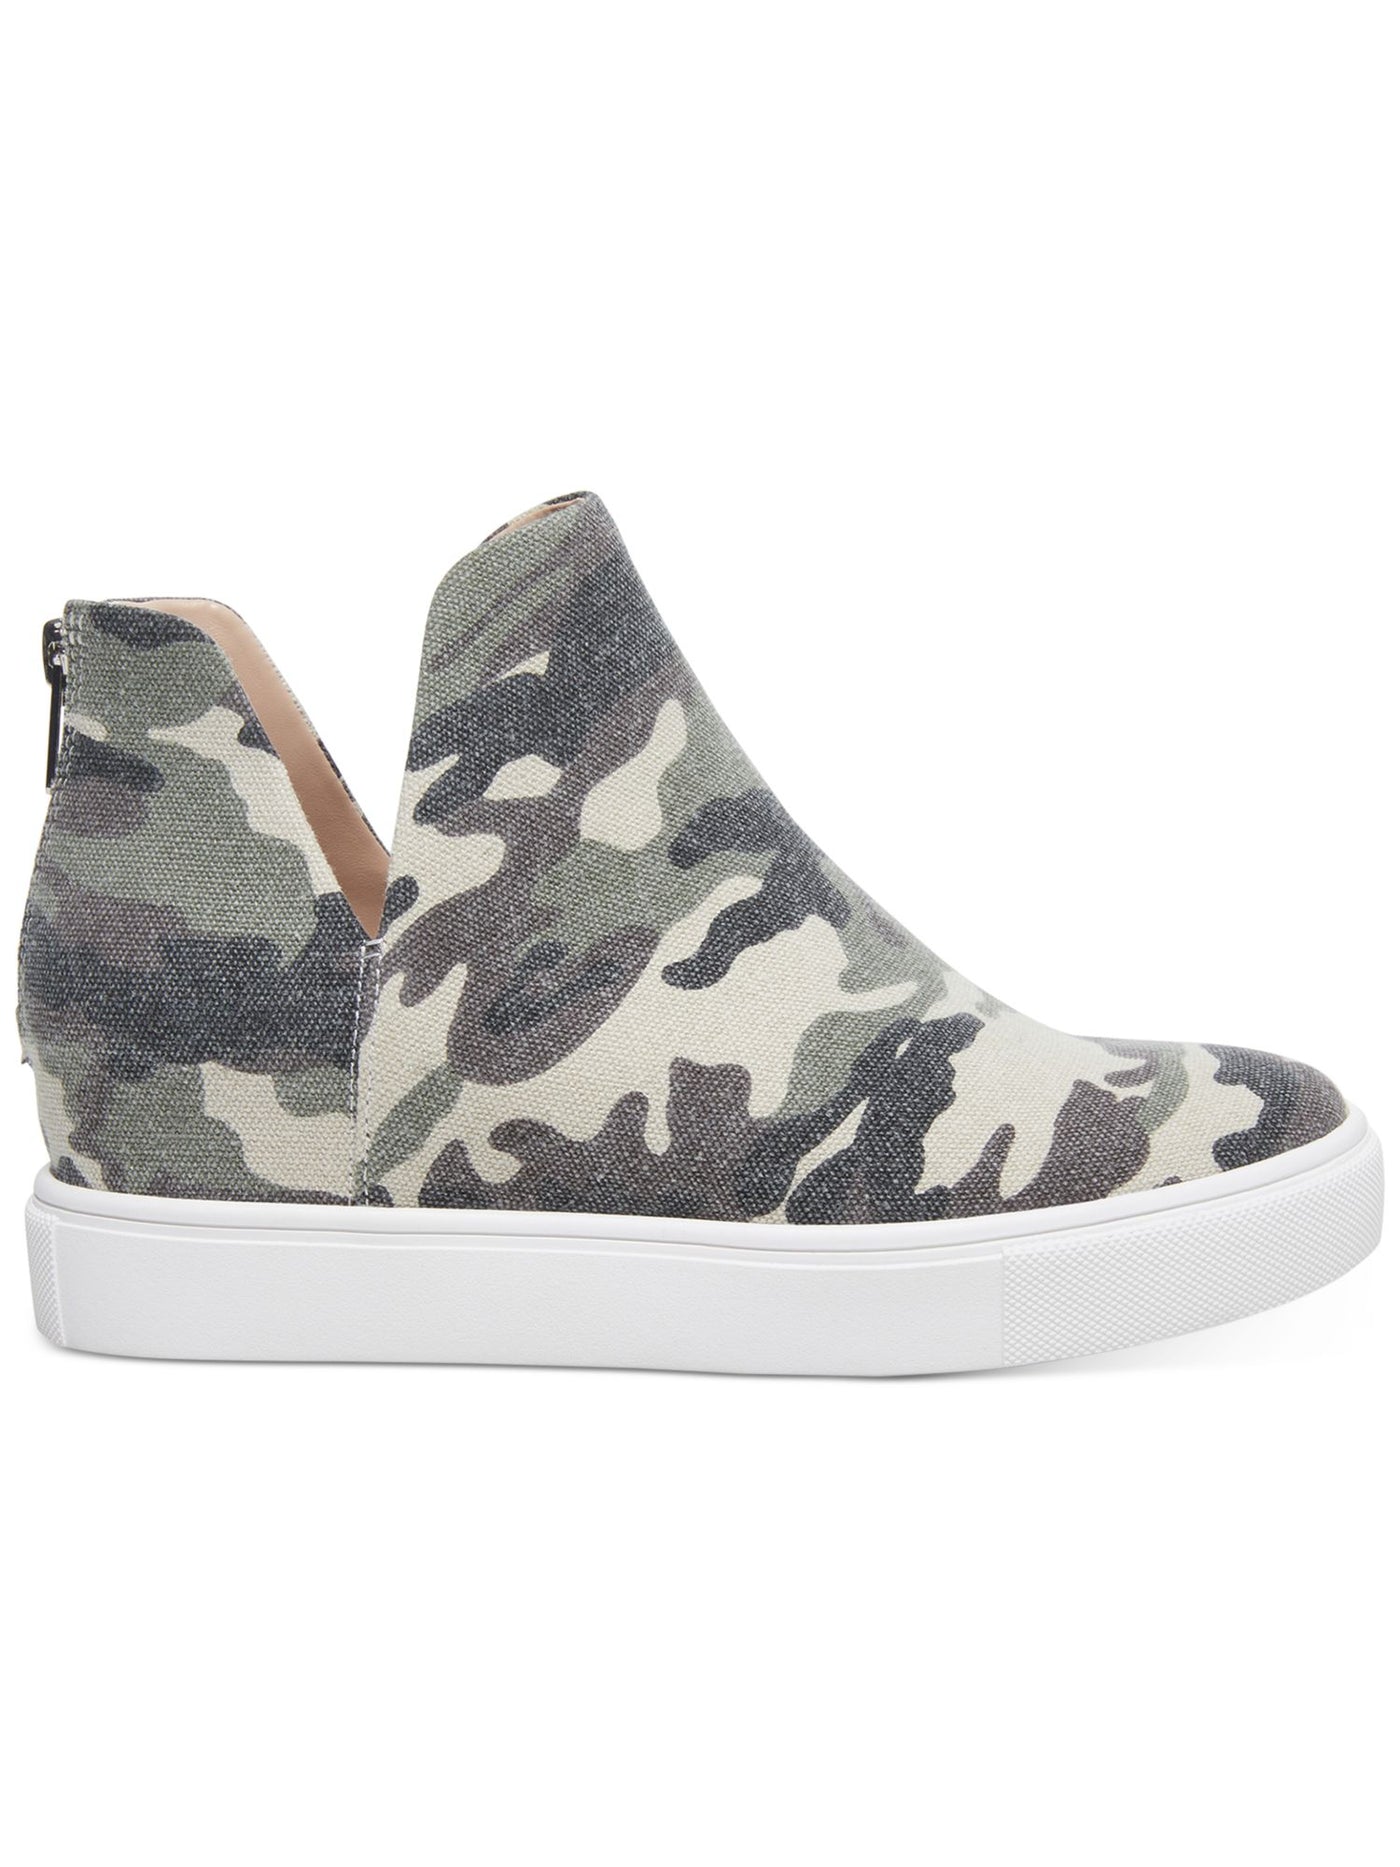 STEVE MADDEN Womens Green Camouflage V-Notch Cutouts Hidden Heel Georgie Round Toe Wedge Zip-Up Athletic Sneakers Shoes 5.5 M